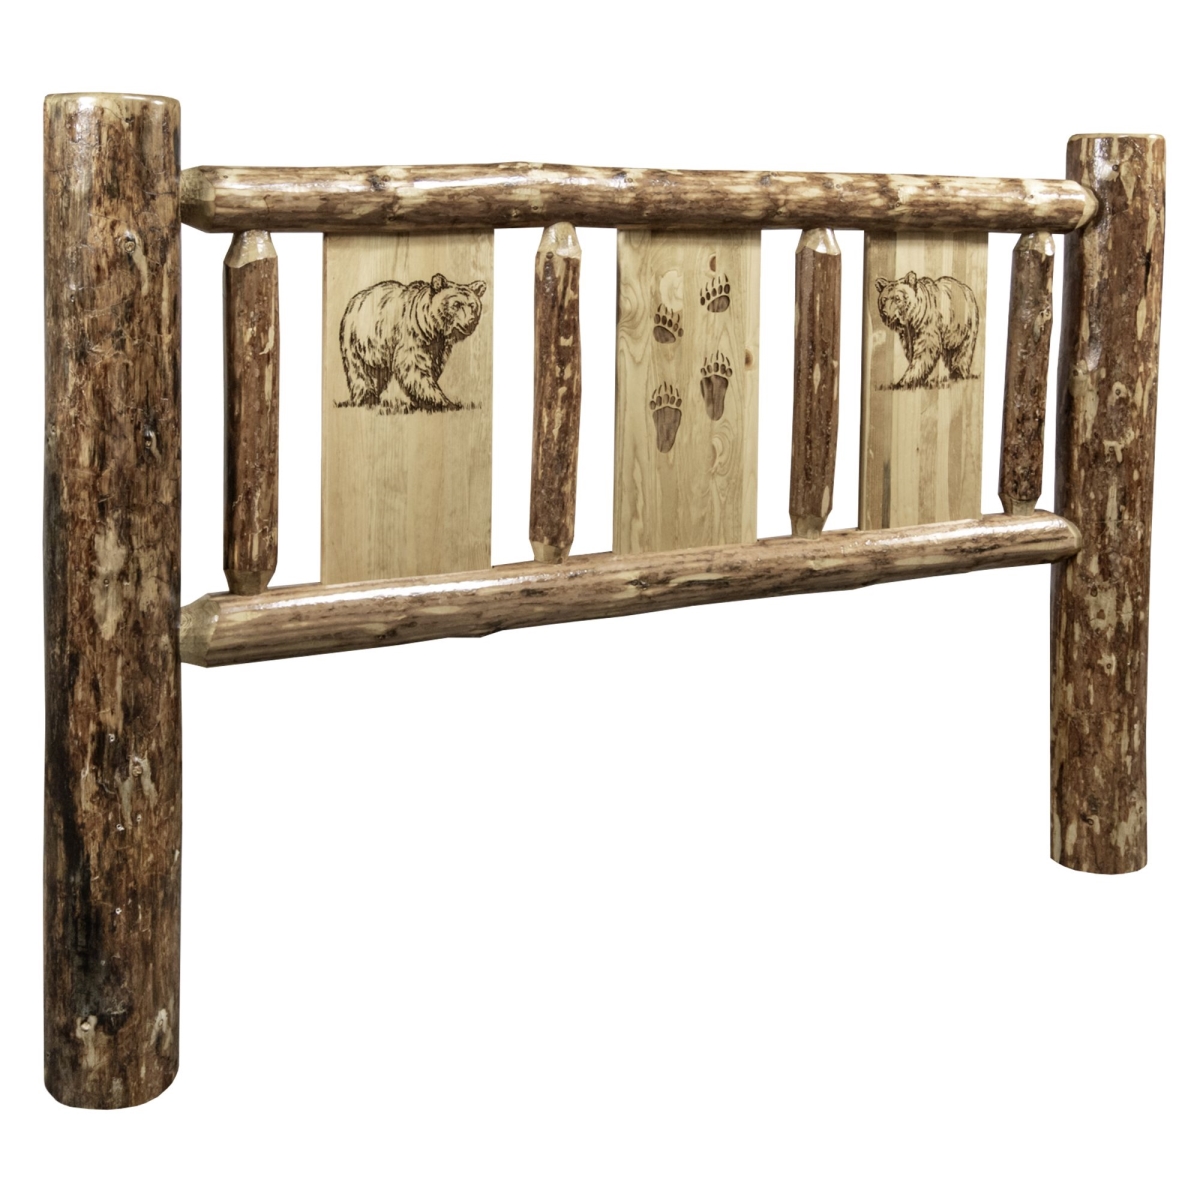 Picture of Montana Woodworks MWGCFHBLZBEAR Glacier Country Collection Headboard with Laser Engraved Bear Design - Full Size